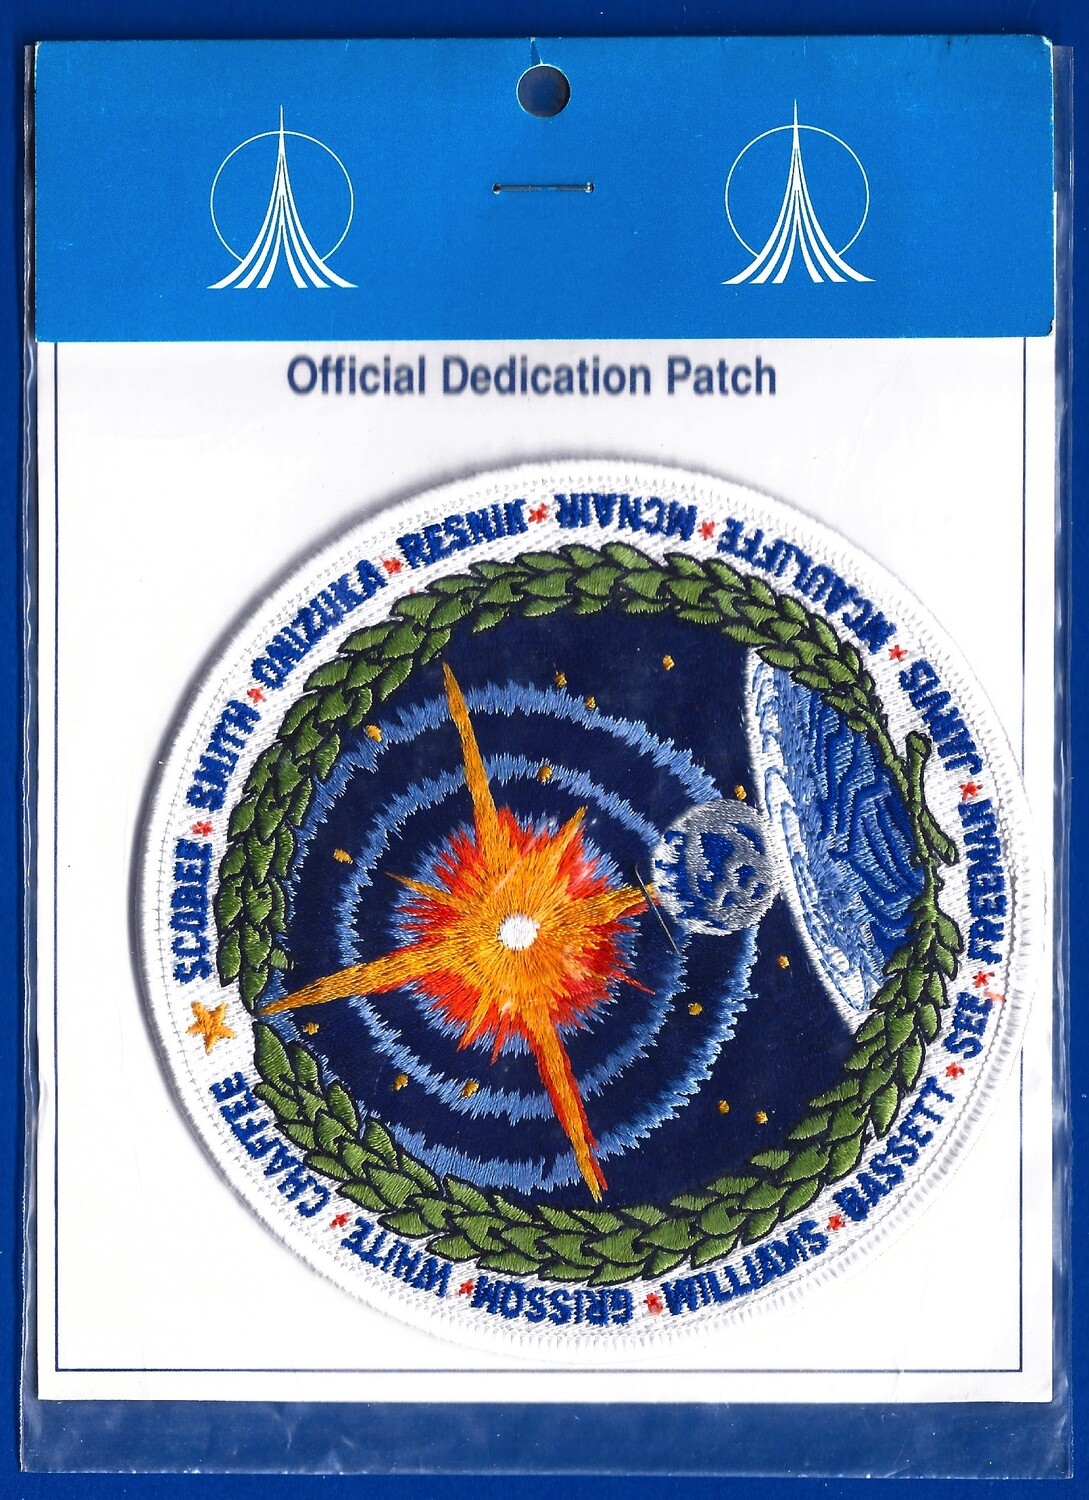 Official Dedication Patch